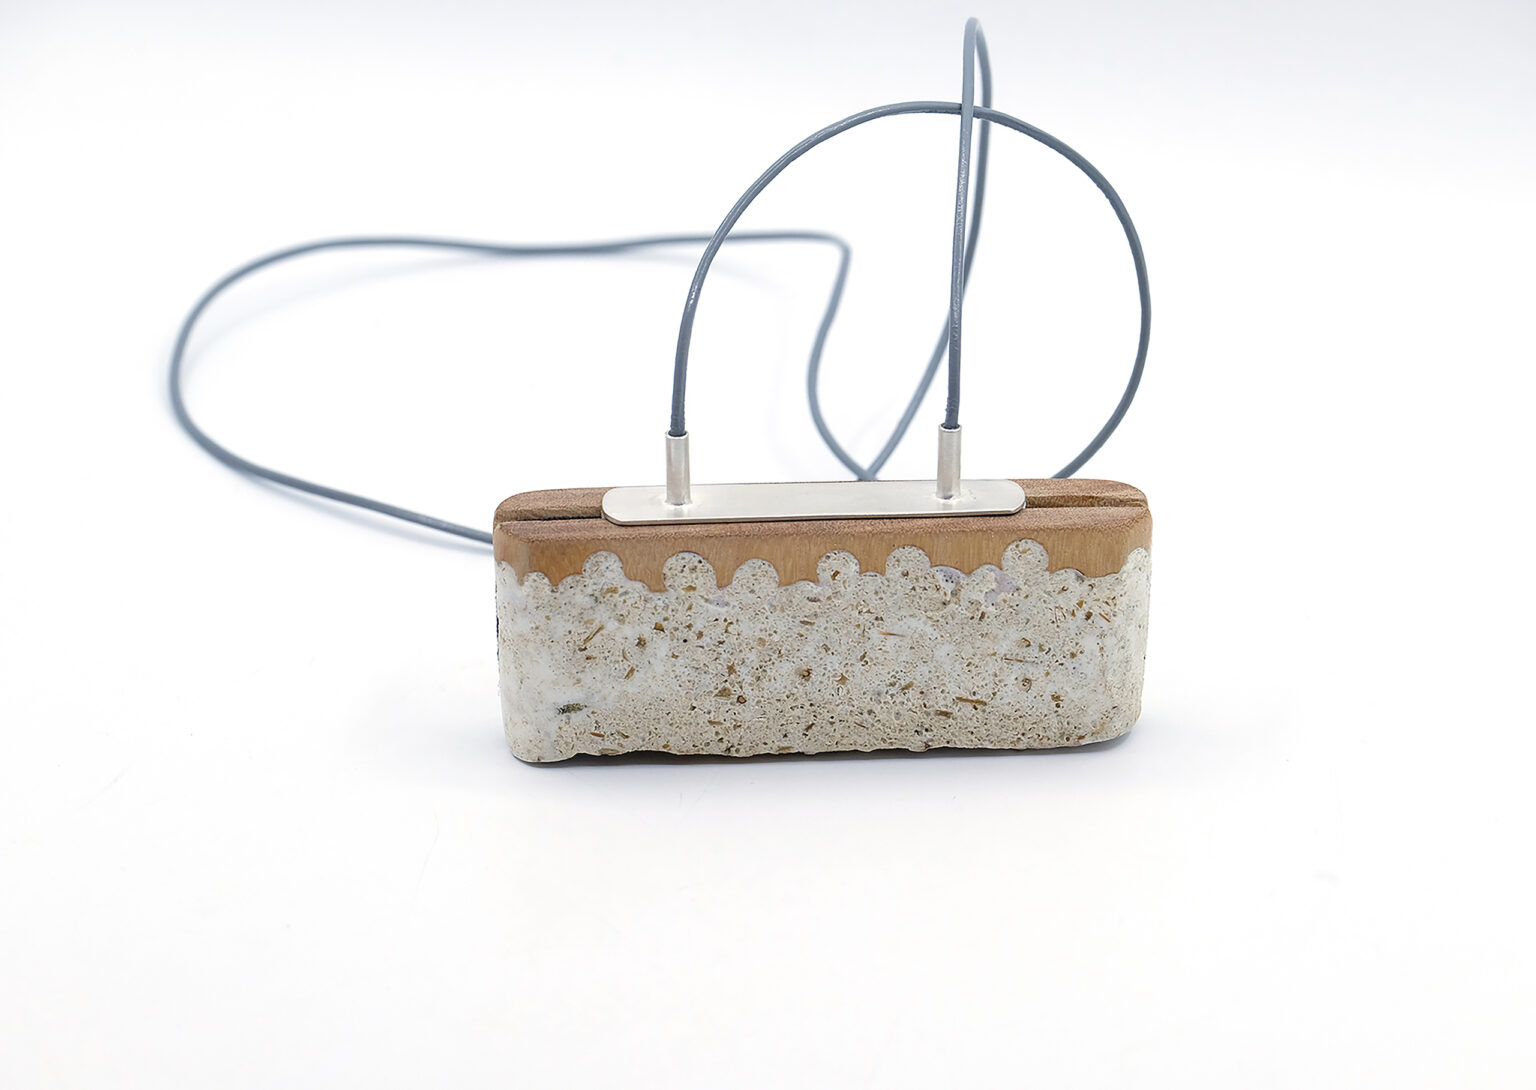 Pendant. wood, silver, reconstructed prickly-pear fibres, leather cord, elastic band. Photo by artists